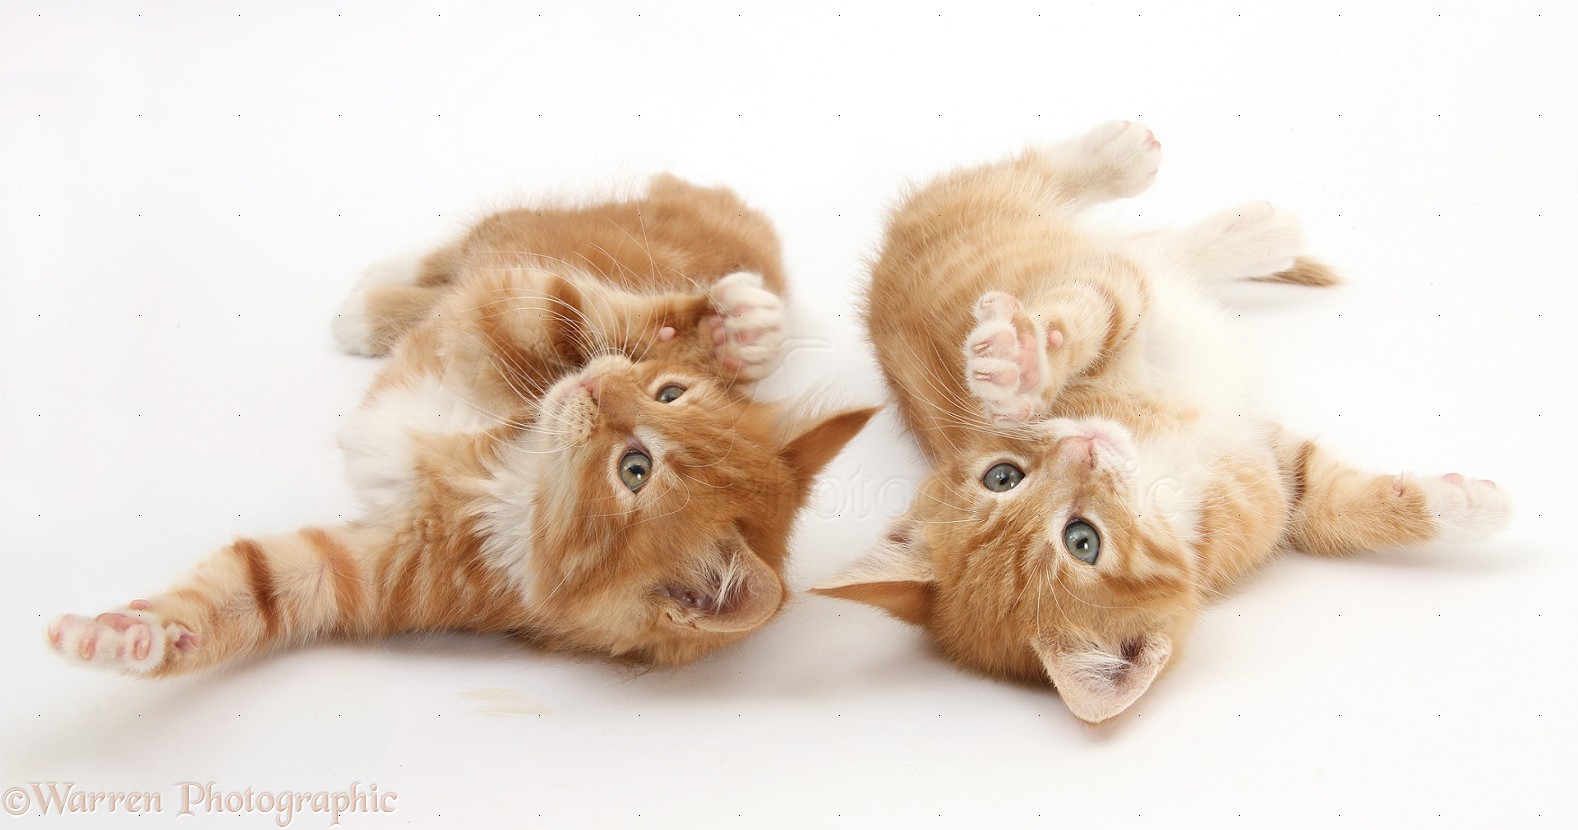 WP31139 Two ginger kittens, Tom and Butch, 8 weeks old, lying together on t...